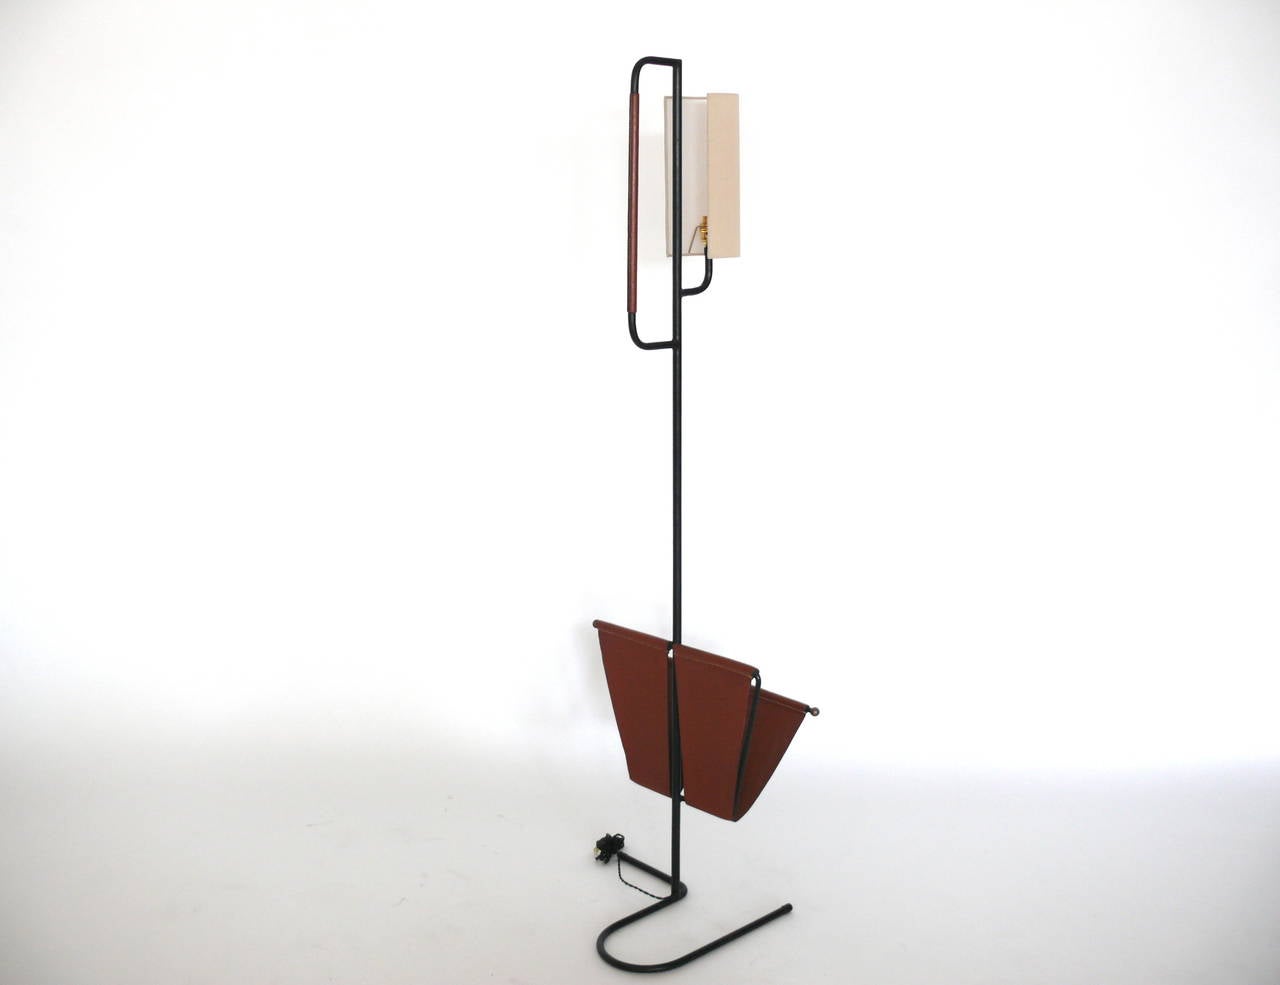 Fantastic floor lamp with built-in magazine rack by Jacques Adnet. Iron frame with saddle leather magazine holder. Iron bar closest to shade is also wrapped in saddle leather. New silk shade. Newly rewired. Very unique piece.